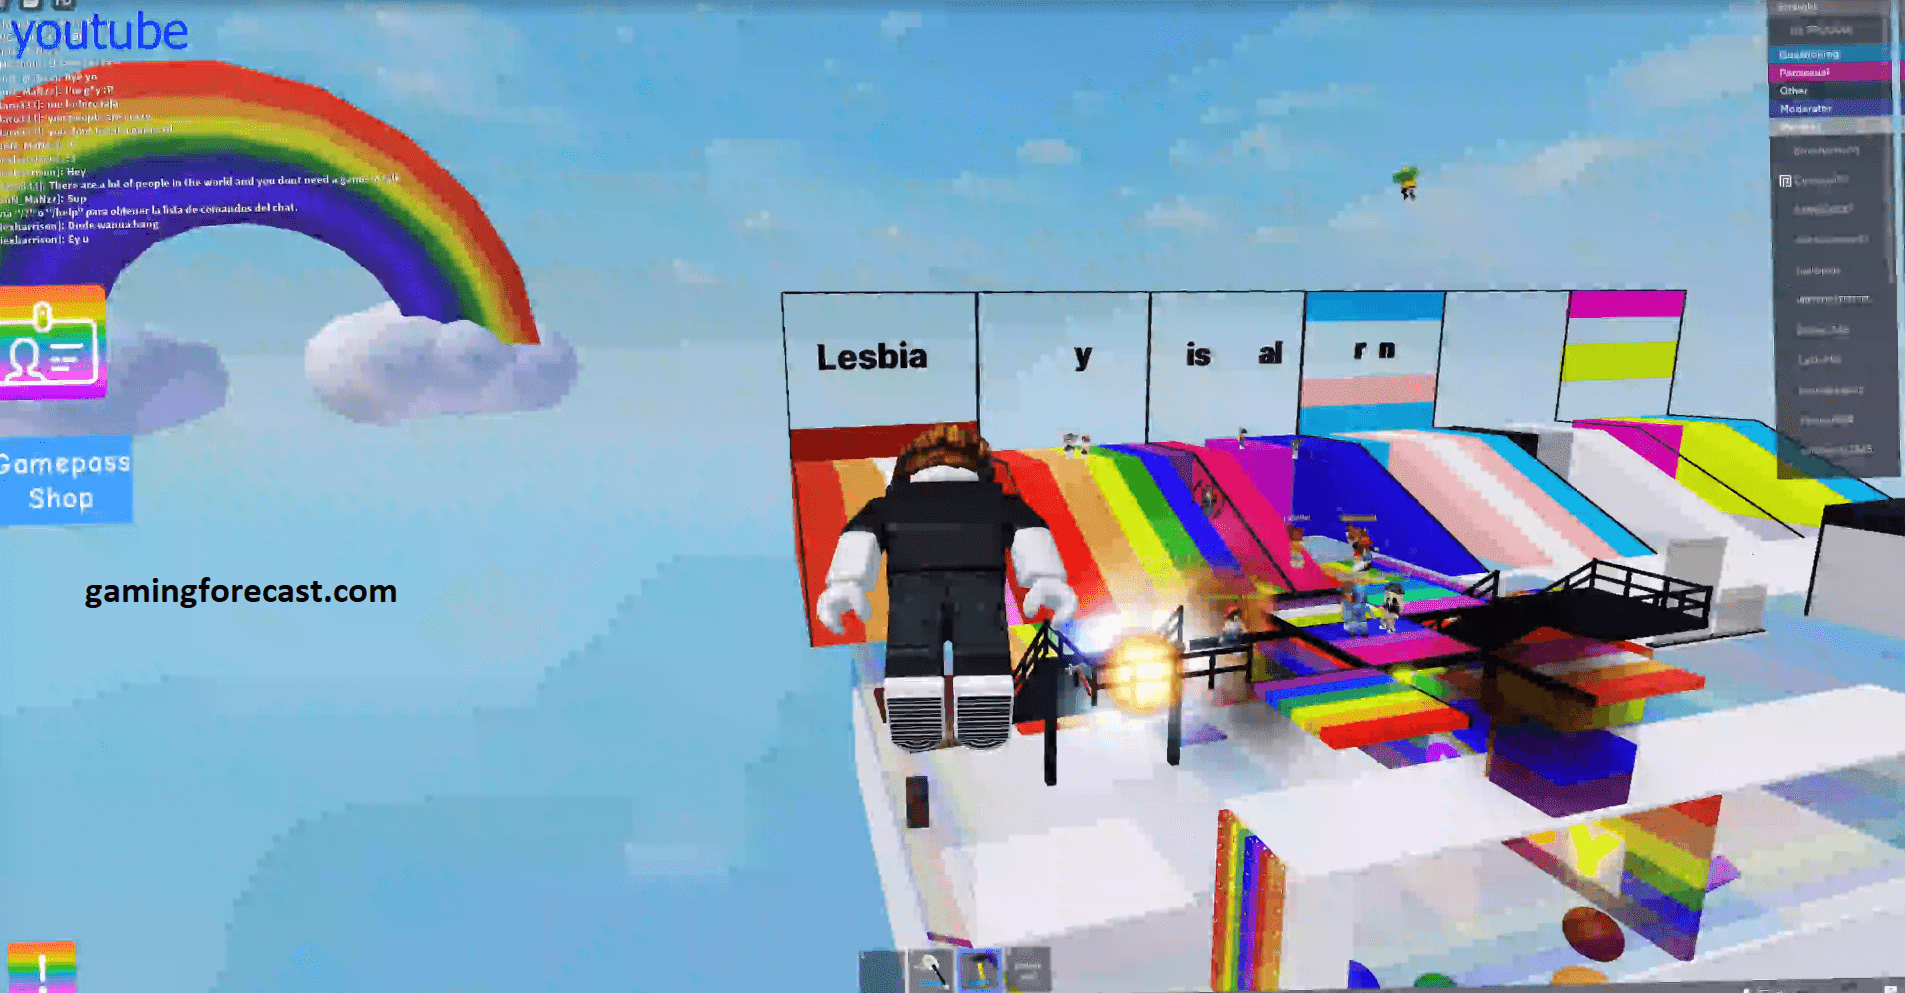 Roblox Hack Download Pc Destroy Lobby Fly Aimbot Scripts 2021 Gaming Forecast Download Free Online Game Hacks - roblox 2021 maps download